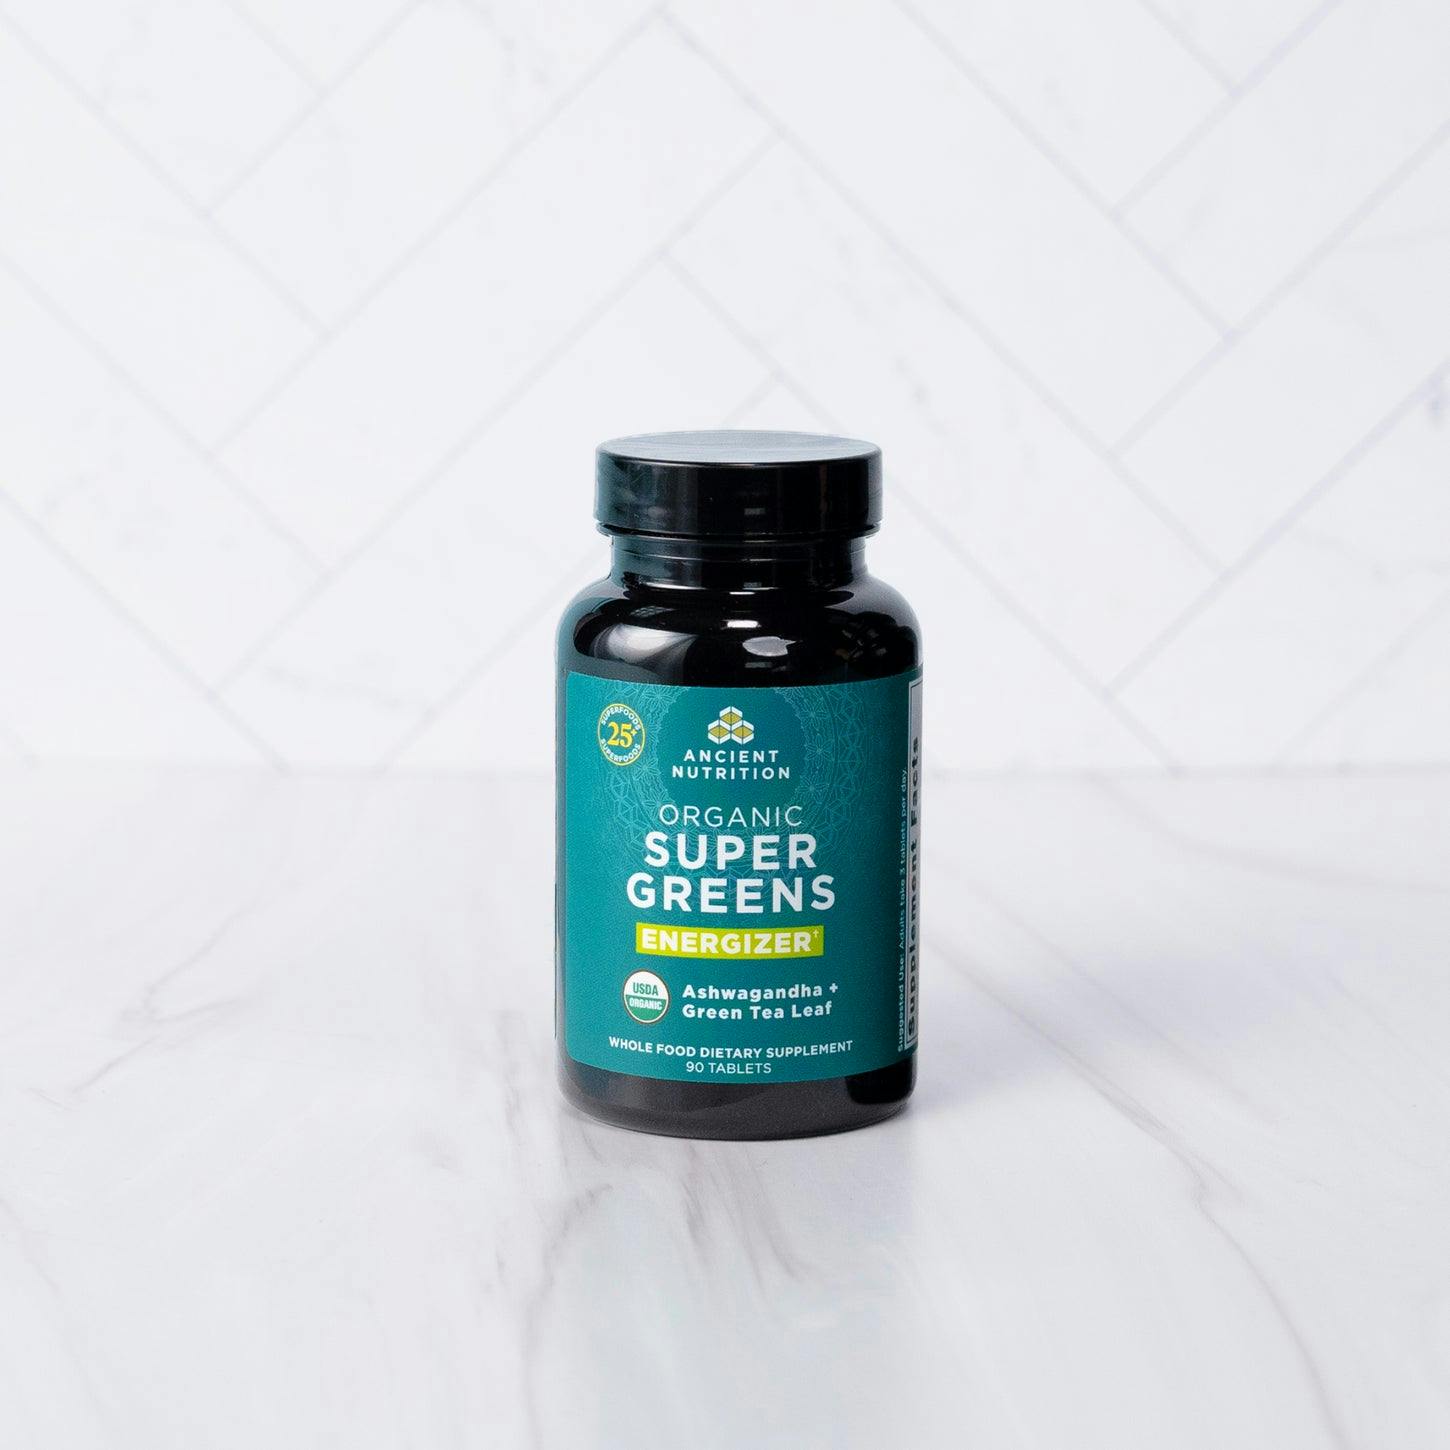 Organic Super Greens Energizer Tablet on a marble countertop